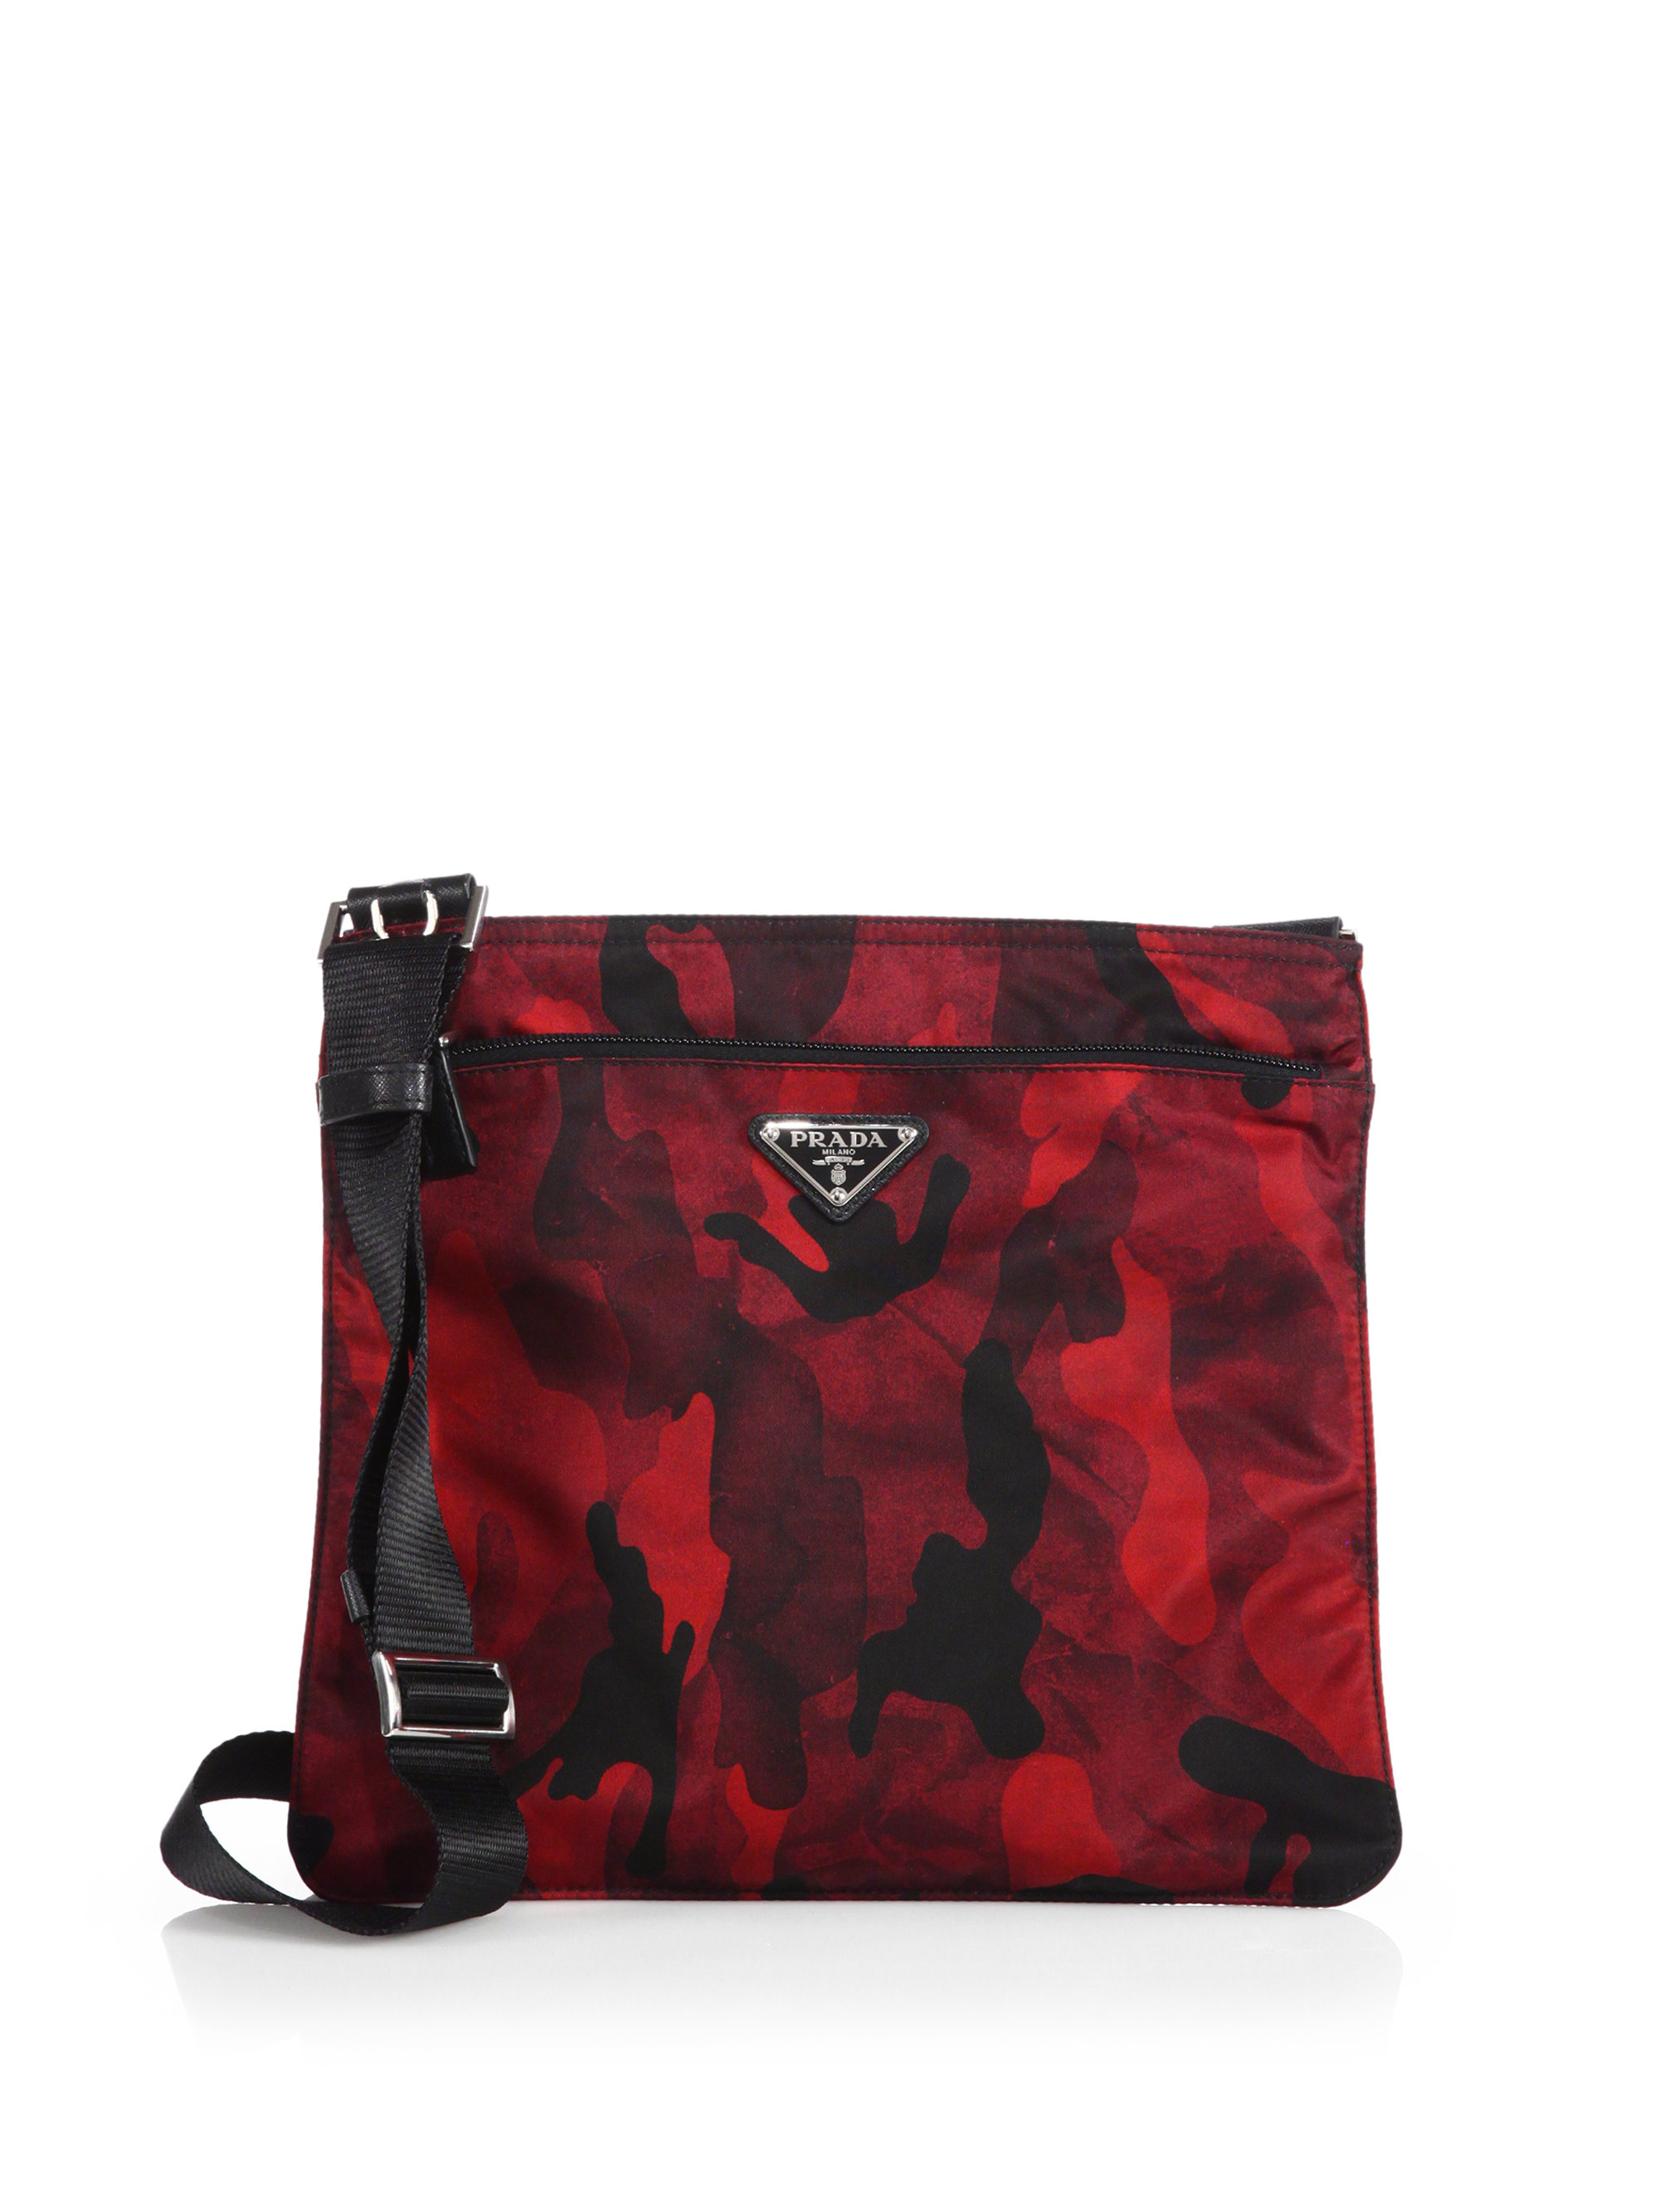 Prada Tessuto Camouflage Small Crossbody Bag in Red (BORDEAUX) | Lyst  